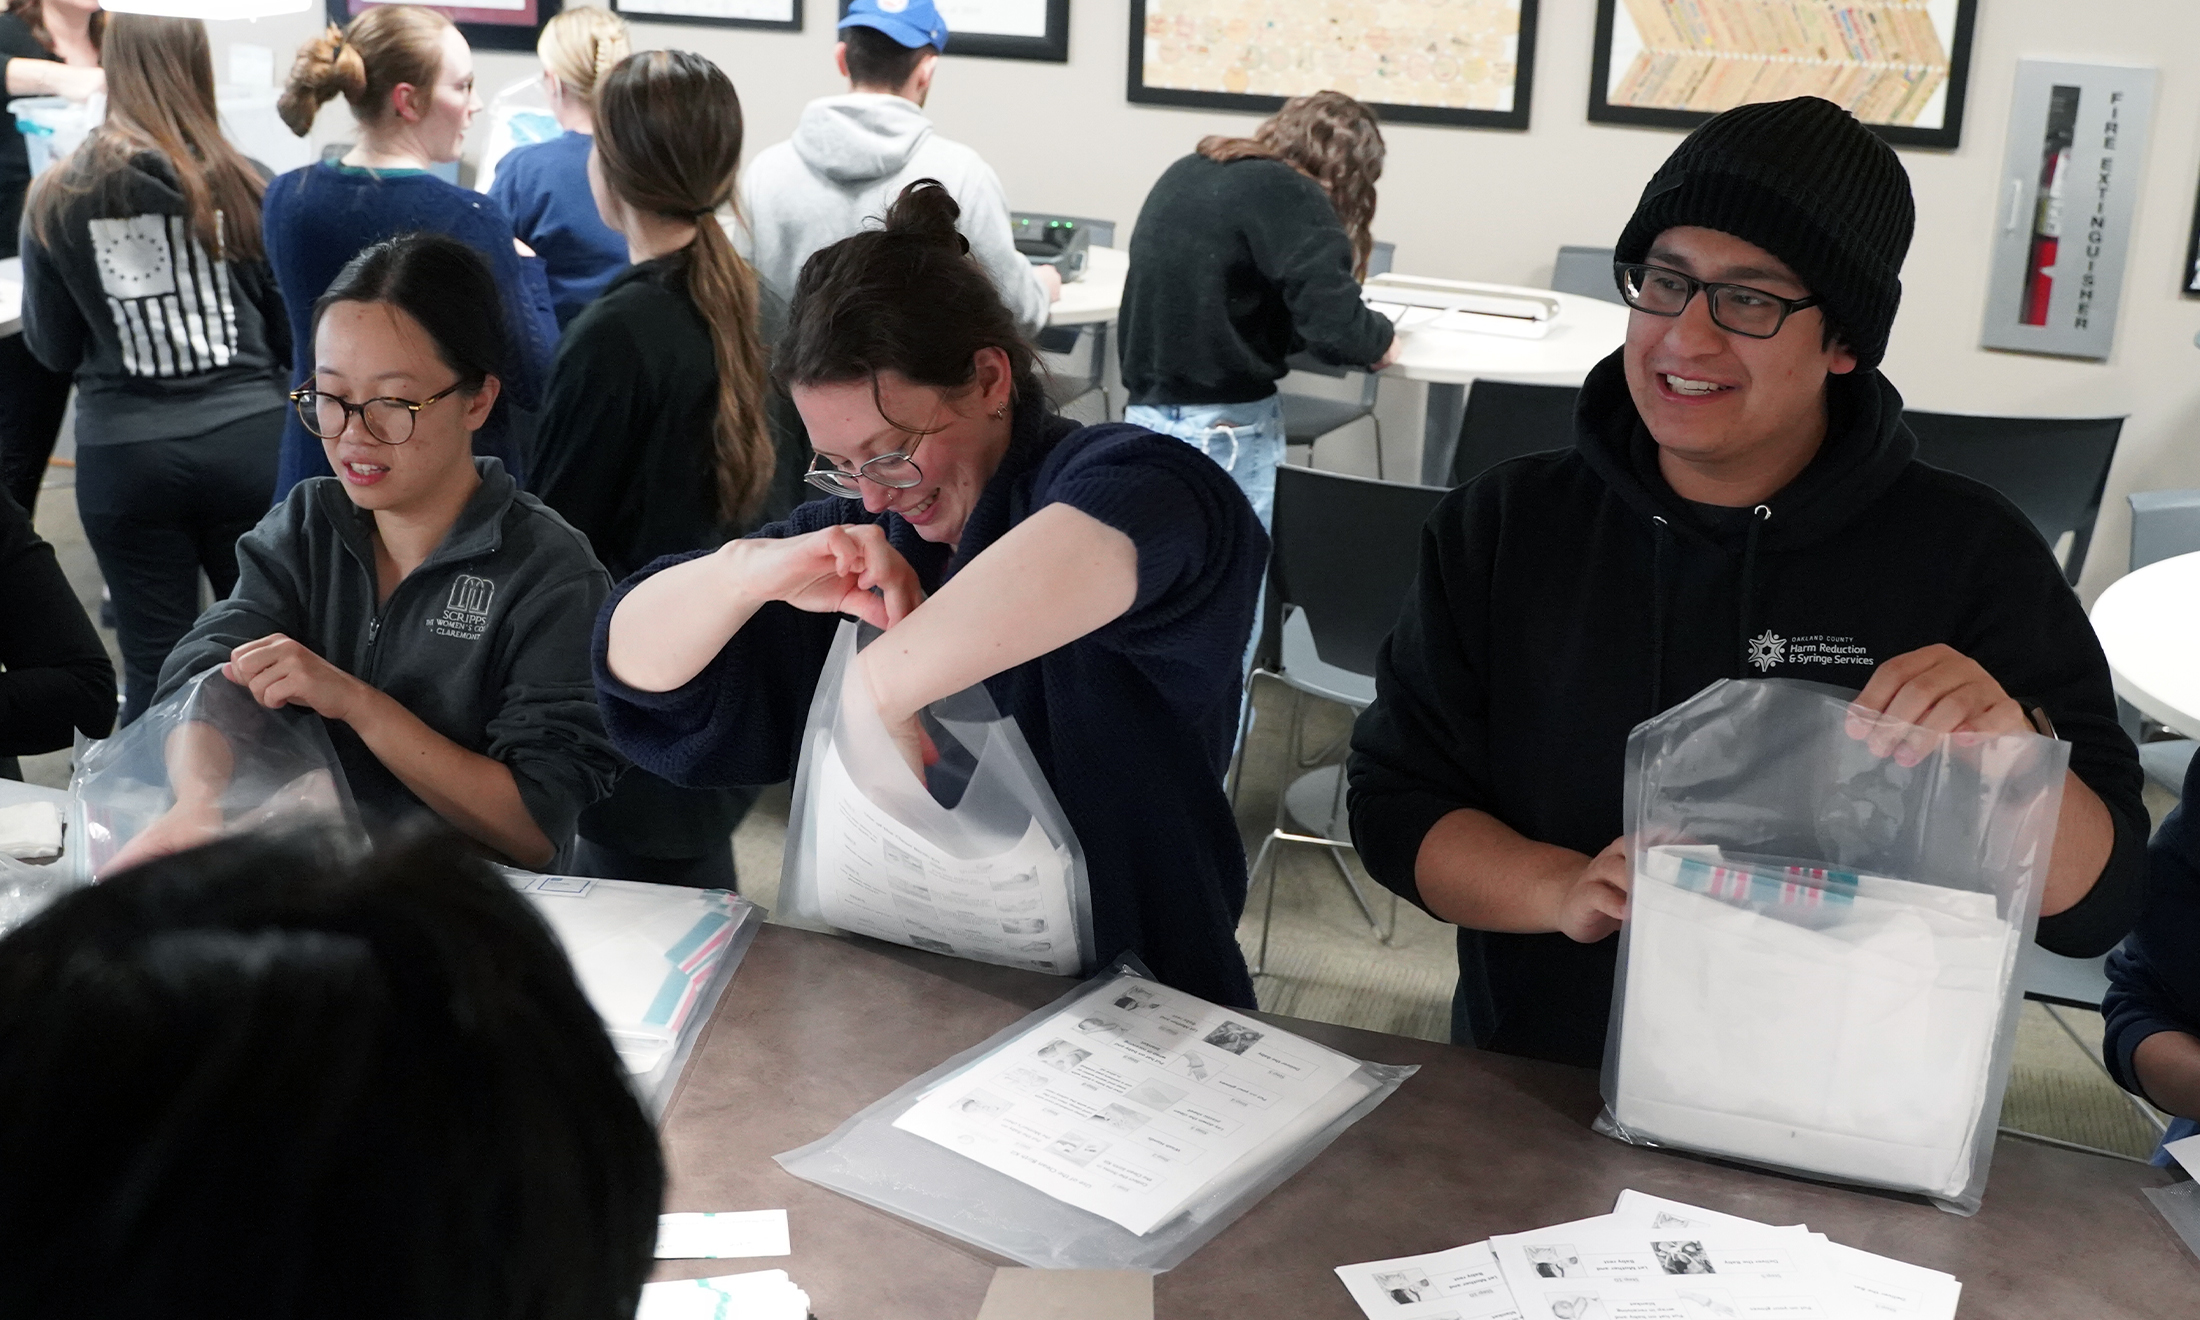 An image of students assembling birthing kits